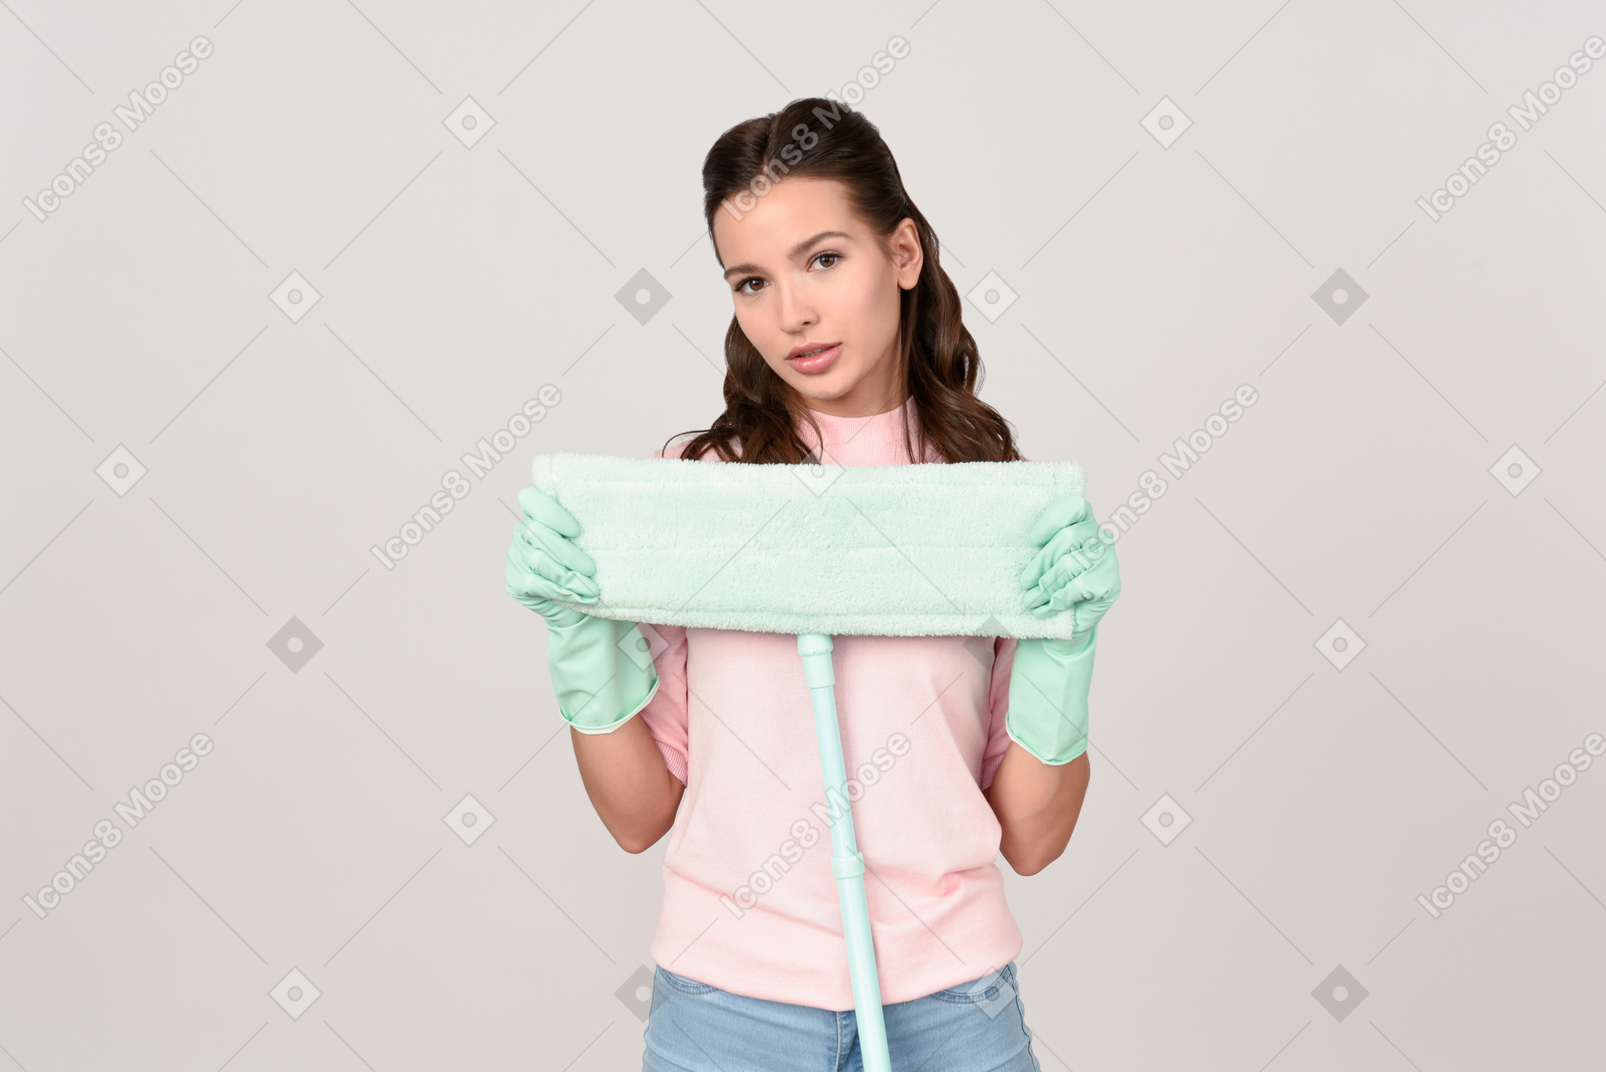 Attractive young woman holding a mop pad